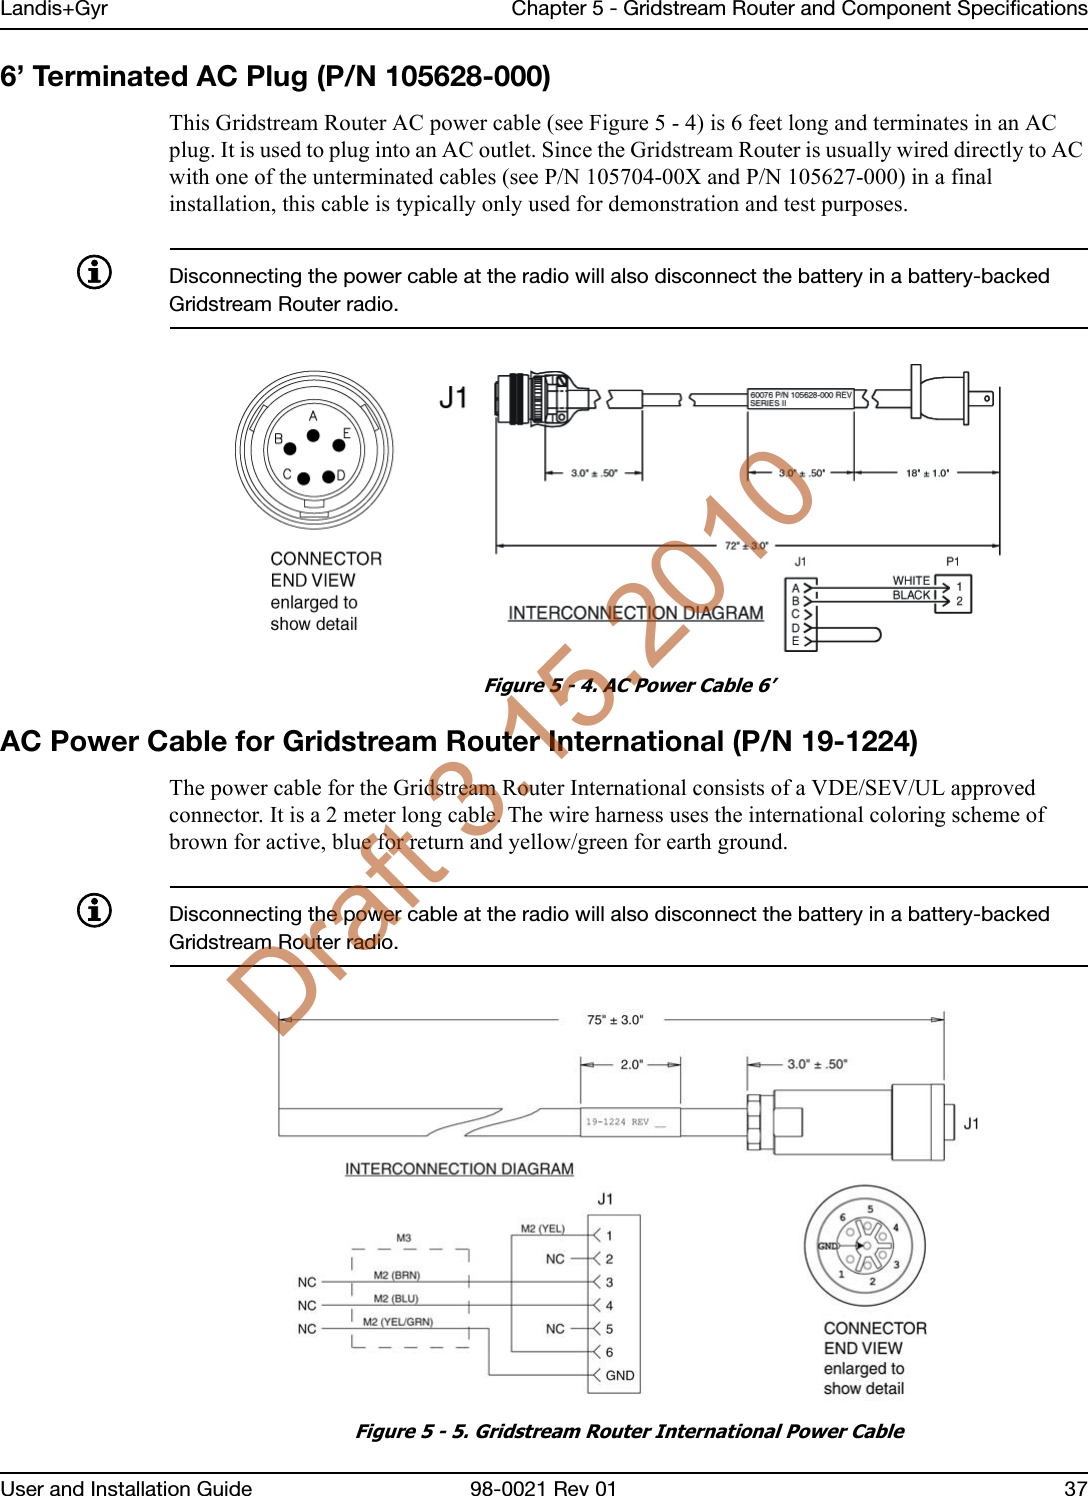 Landis+Gyr Chapter 5 - Gridstream Router and Component SpecificationsUser and Installation Guide 98-0021 Rev 01 376’ Terminated AC Plug (P/N 105628-000)This Gridstream Router AC power cable (see Figure 5 - 4) is 6 feet long and terminates in an AC plug. It is used to plug into an AC outlet. Since the Gridstream Router is usually wired directly to AC with one of the unterminated cables (see P/N 105704-00X and P/N 105627-000) in a final installation, this cable is typically only used for demonstration and test purposes.Disconnecting the power cable at the radio will also disconnect the battery in a battery-backed Gridstream Router radio.Figure 5 - 4. AC Power Cable 6’AC Power Cable for Gridstream Router International (P/N 19-1224)The power cable for the Gridstream Router International consists of a VDE/SEV/UL approved connector. It is a 2 meter long cable. The wire harness uses the international coloring scheme of brown for active, blue for return and yellow/green for earth ground.Disconnecting the power cable at the radio will also disconnect the battery in a battery-backed Gridstream Router radio.Figure 5 - 5. Gridstream Router International Power CableDraft 3.15.2010